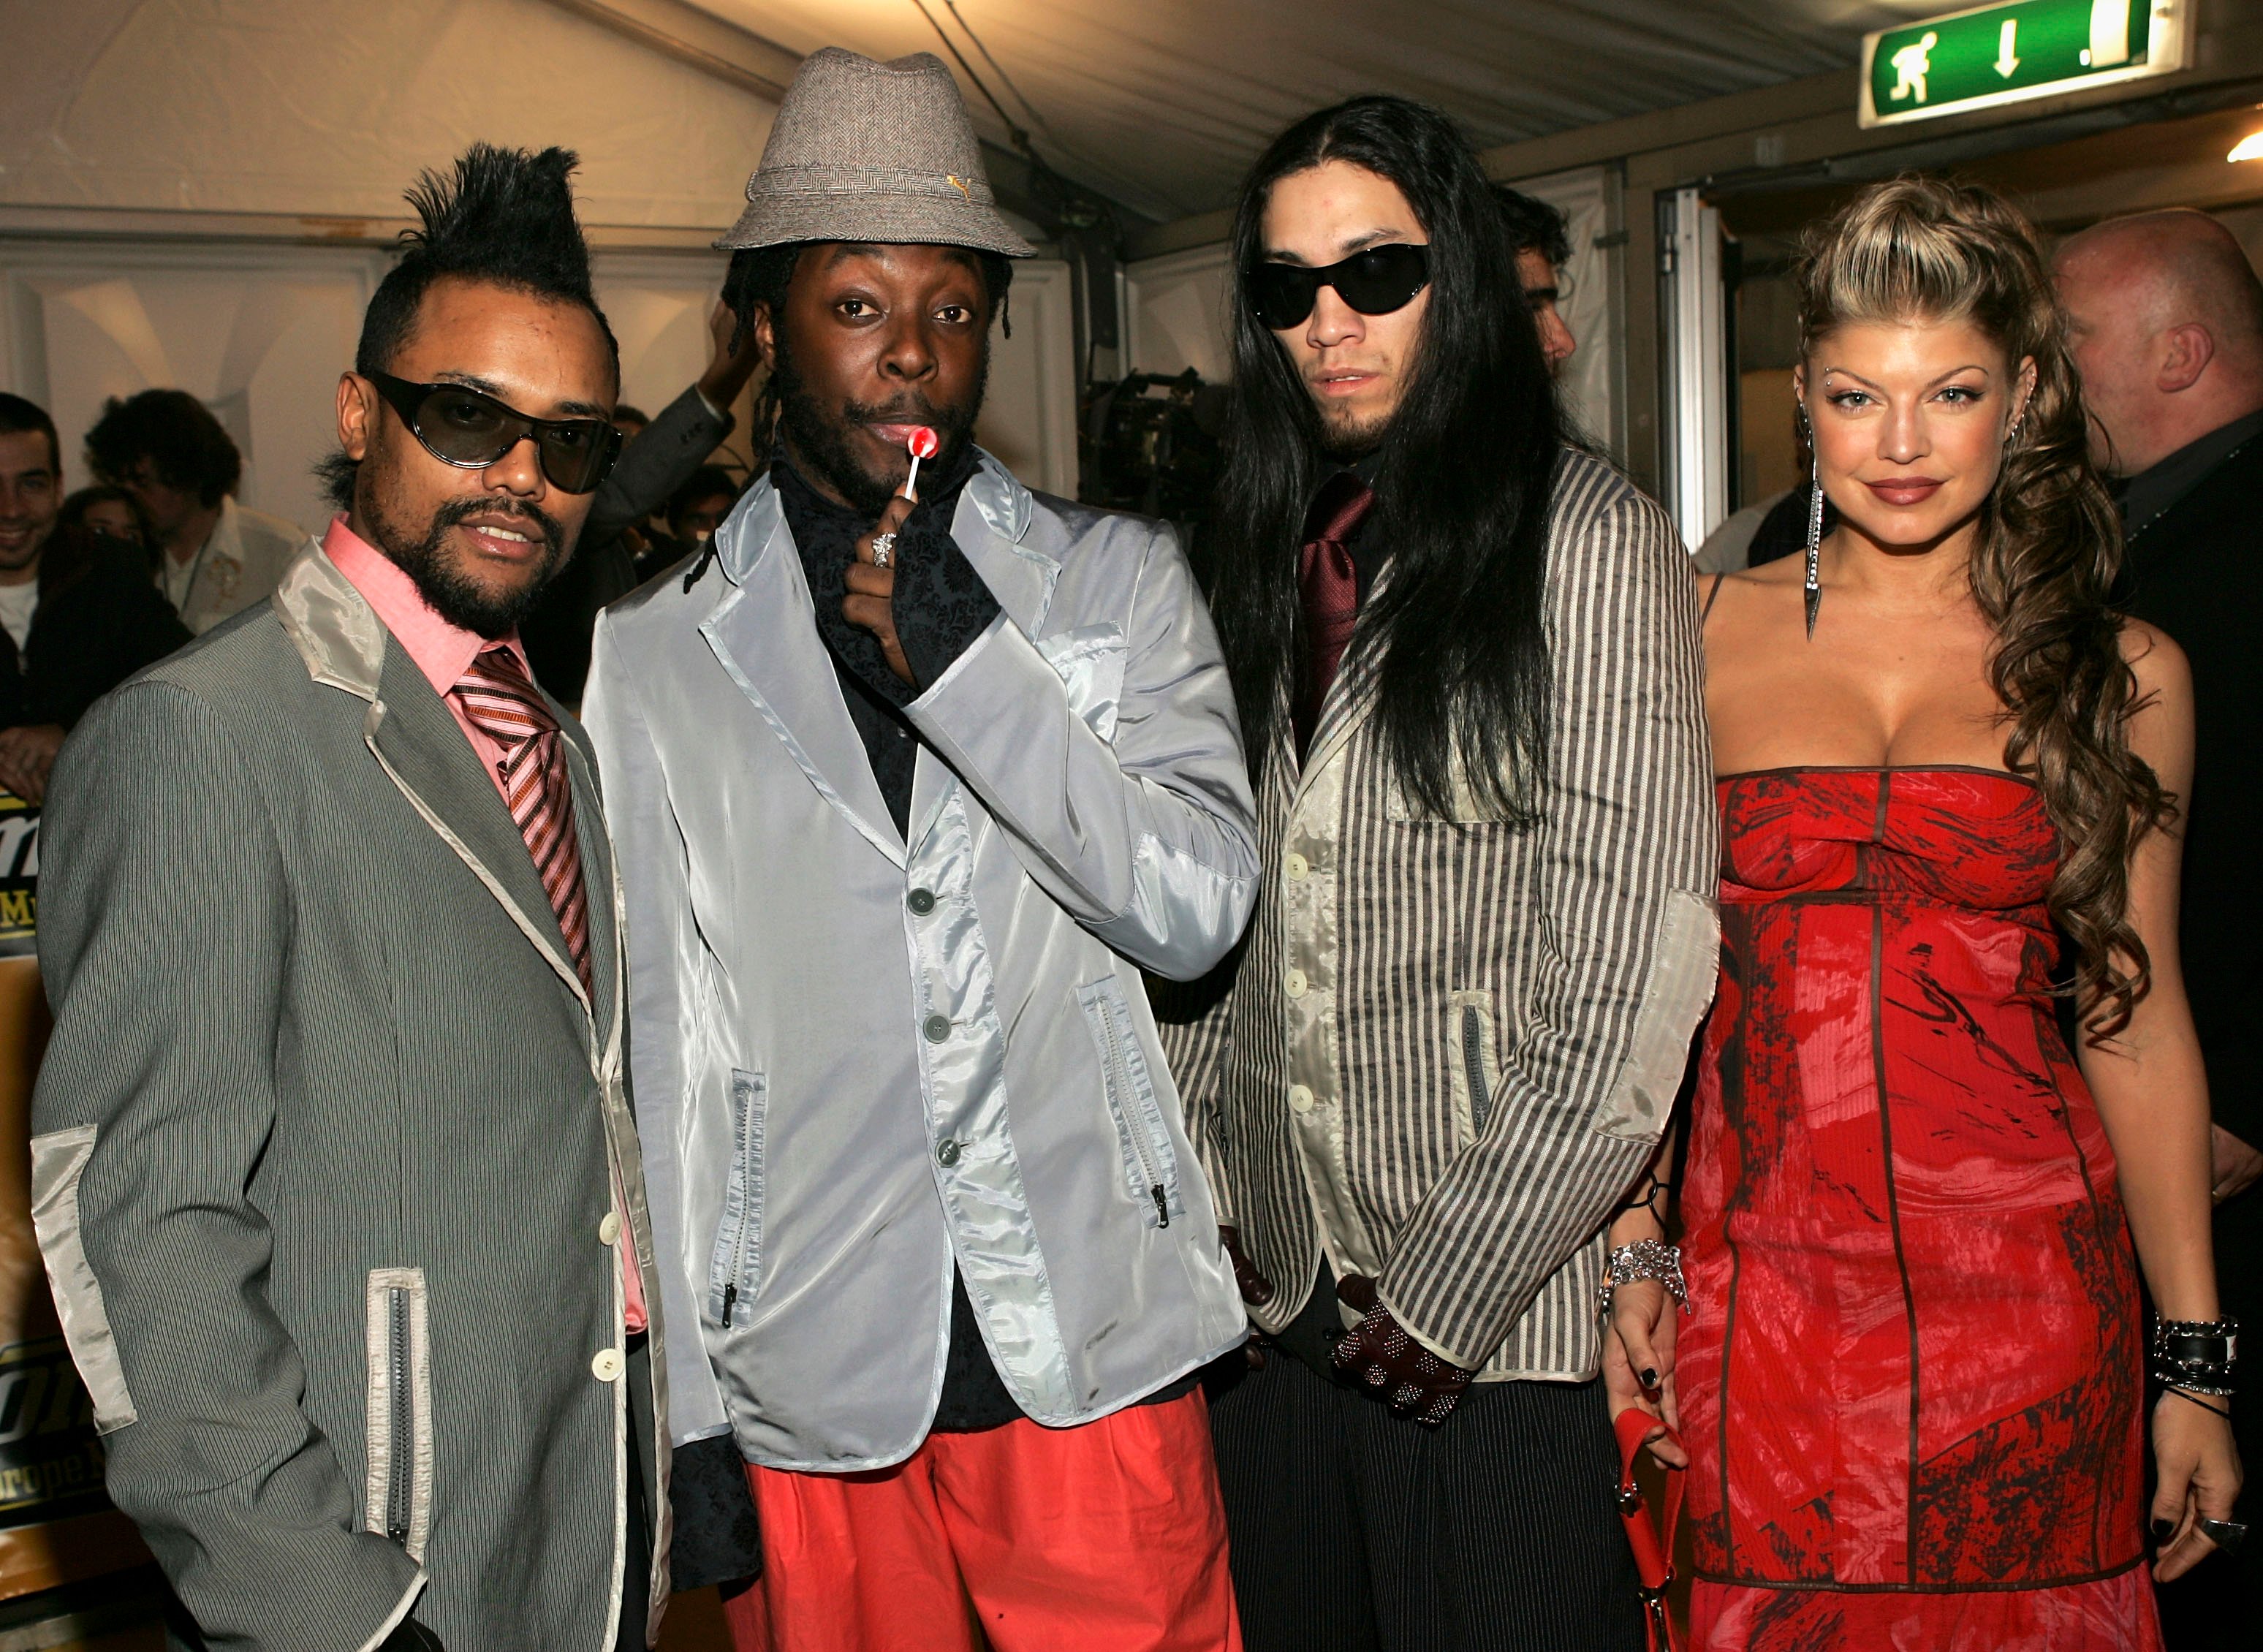 The Black Eyed Peas together